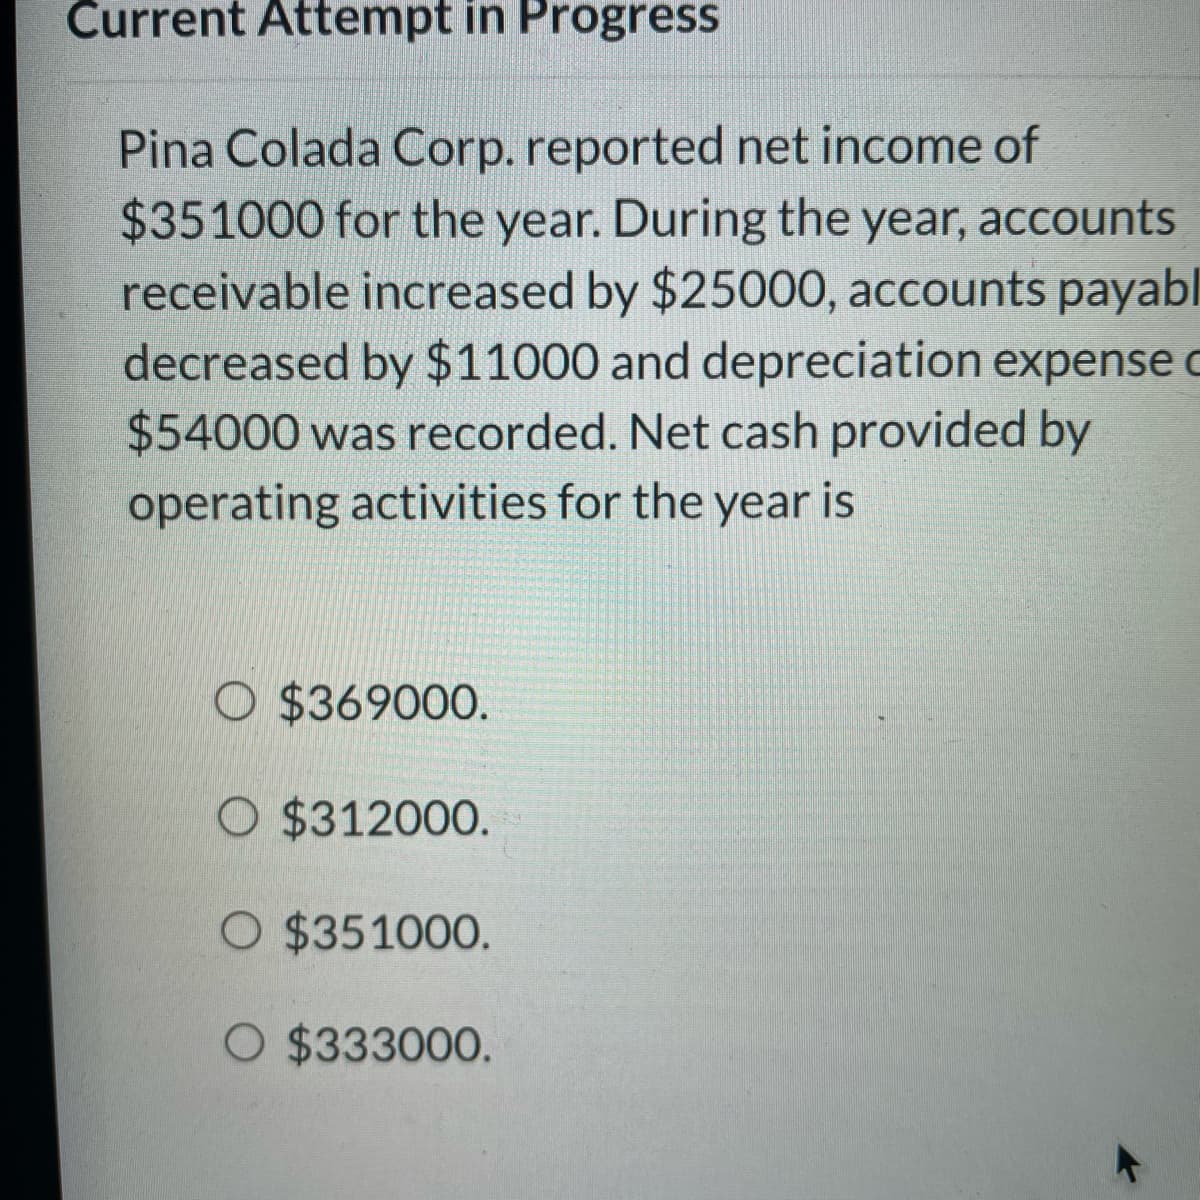 Current Attempt in Progress
Pina Colada Corp. reported net income of
$351000 for the year. During the year, accounts
receivable increased by $25000, accounts payabl
decreased by $11000 and depreciation expense c
$54000 was recorded. Net cash provided by
operating activities for the year is
O $369000.
O $312000.
O $351000.
O $333000.
